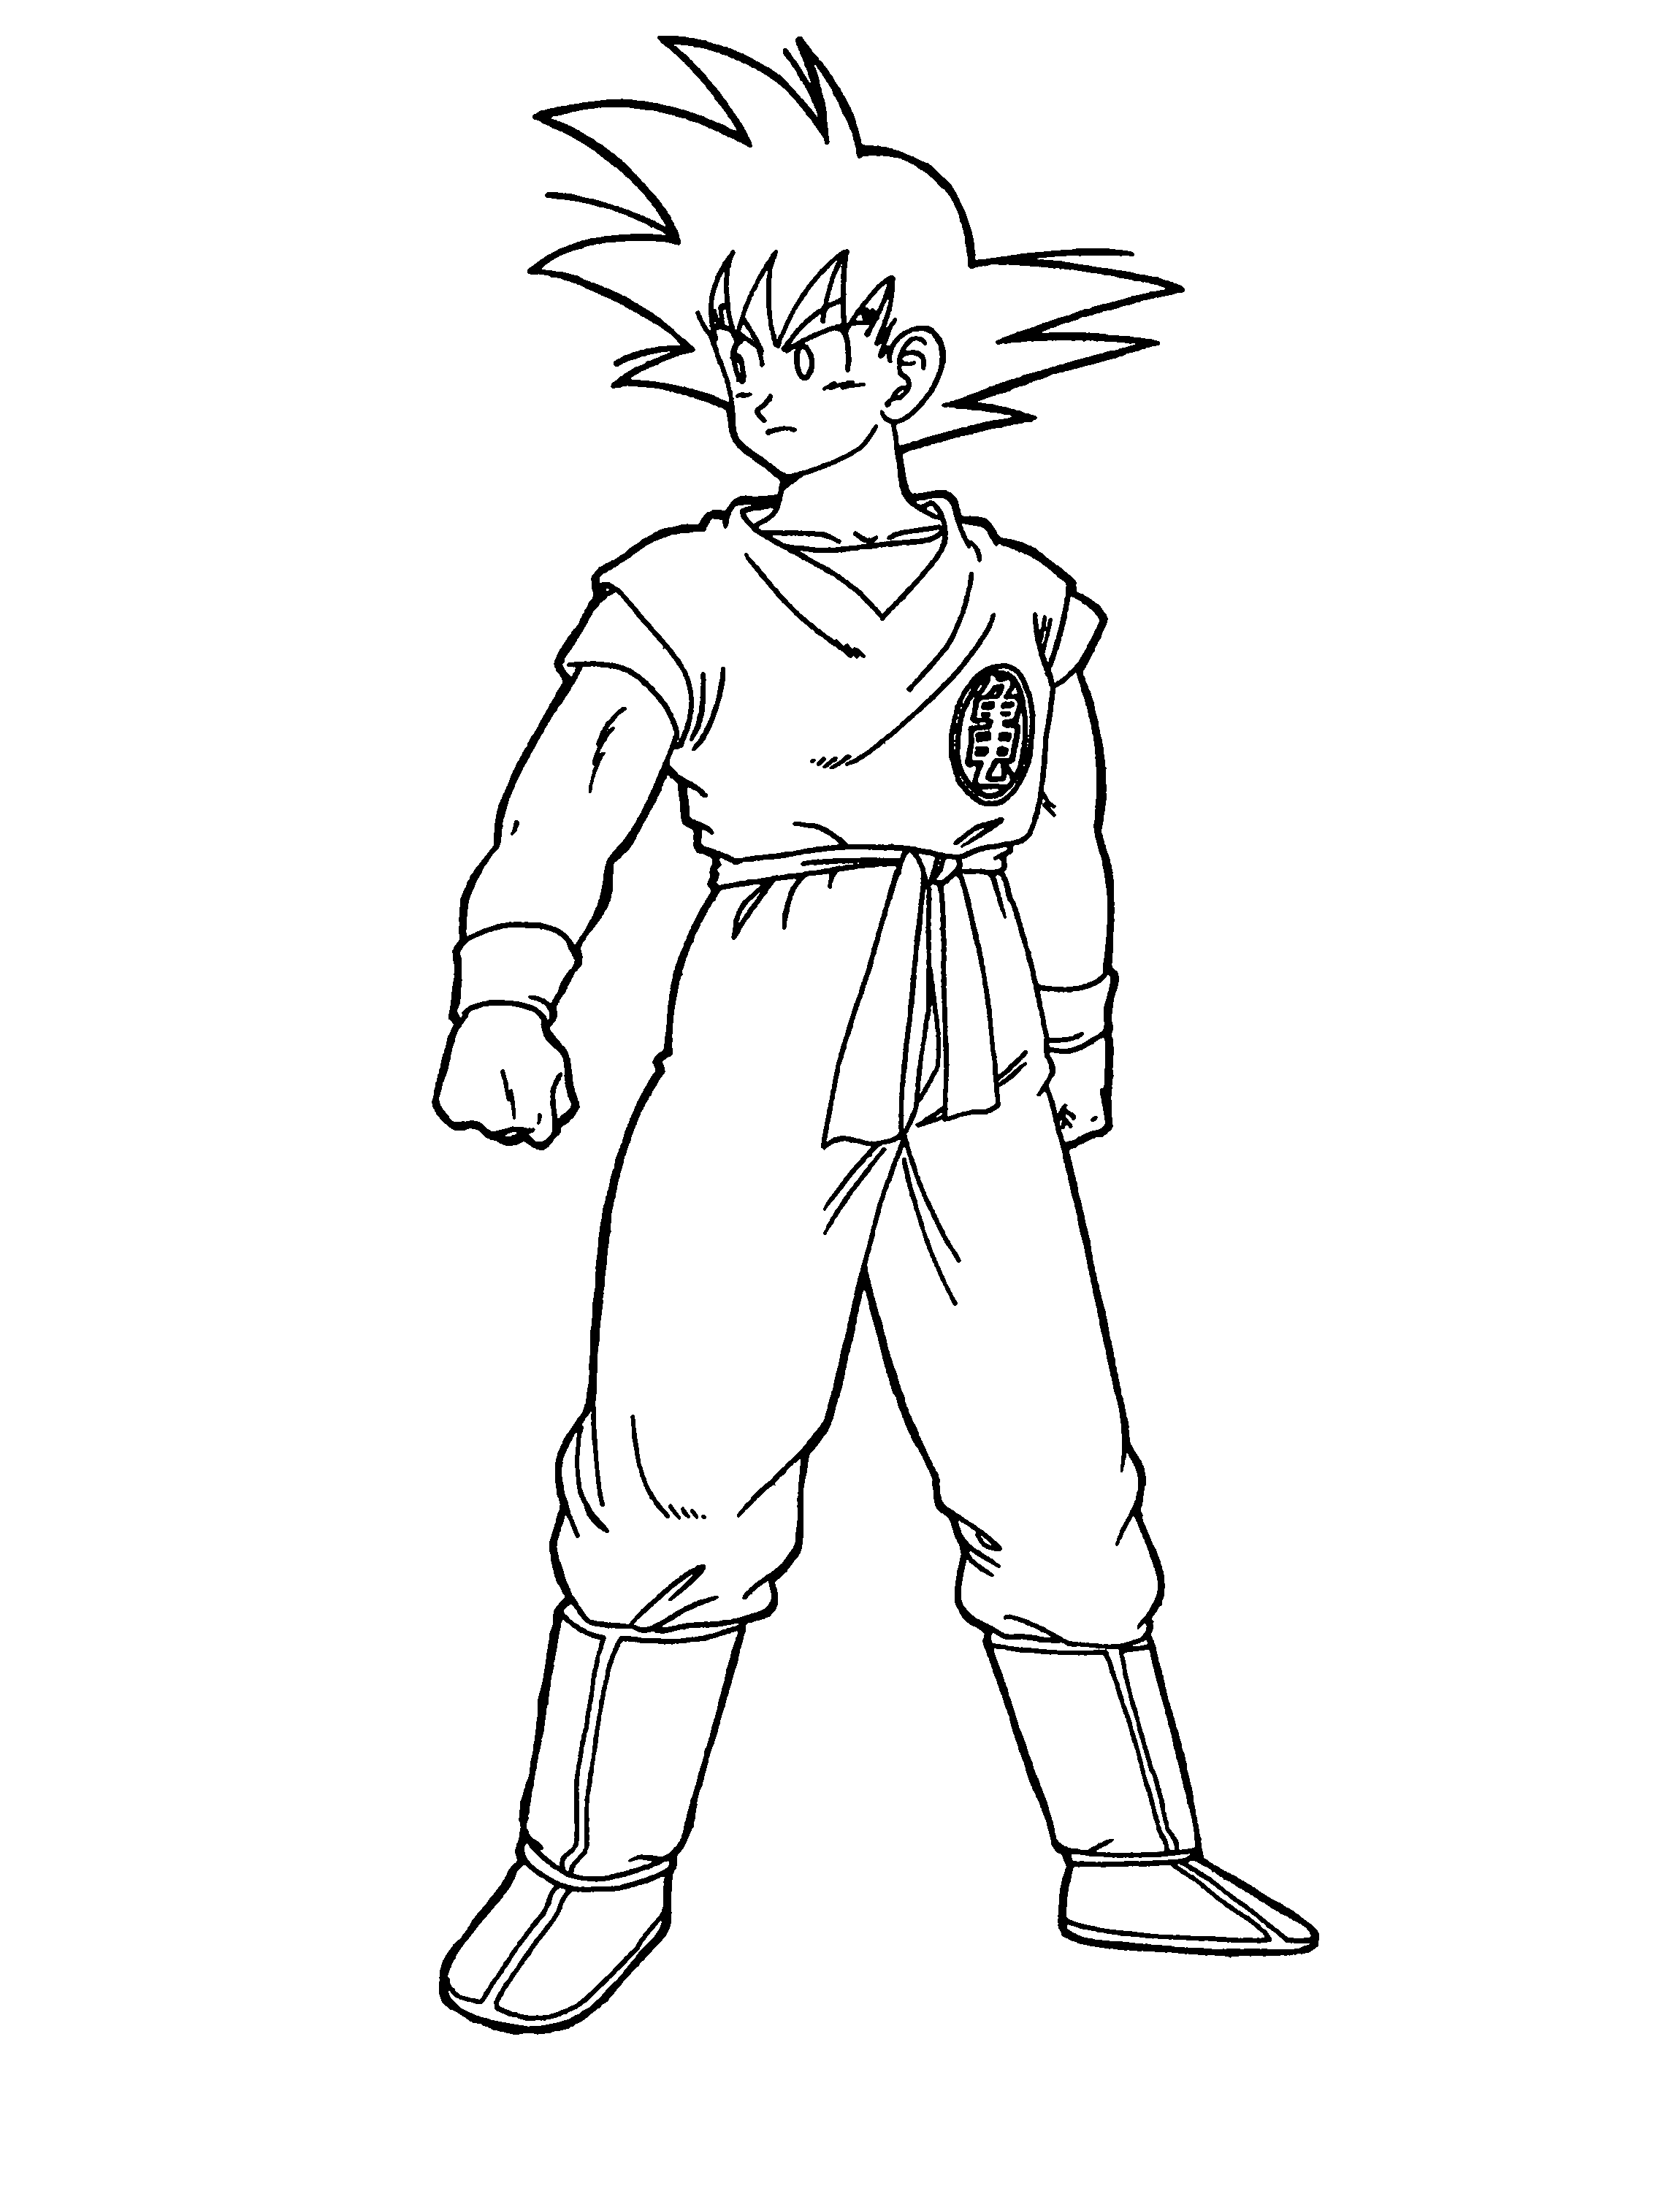 Dragon Ball Z Gogeta Coloring Pages - Coloring Home